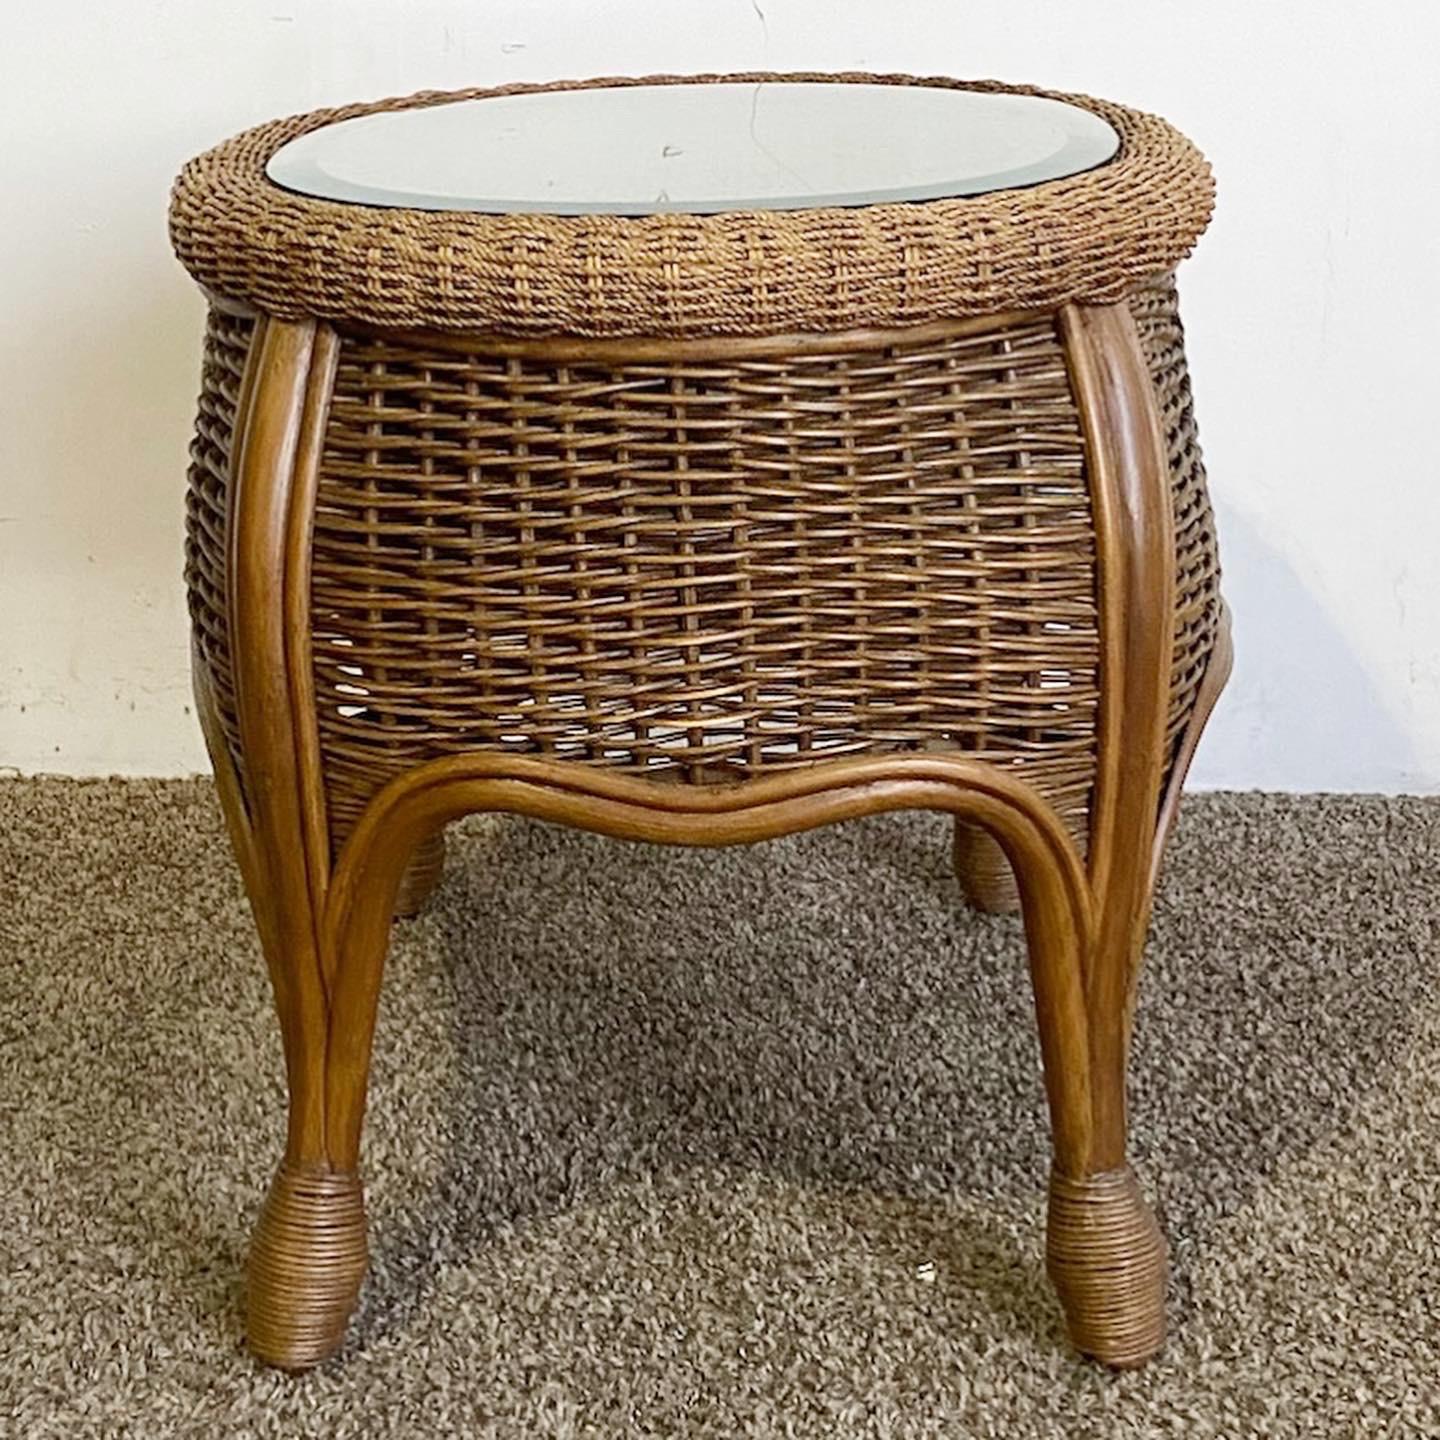 Boho Chic Bamboo Rattan and Wicker Glass Top Side Table In Good Condition For Sale In Delray Beach, FL